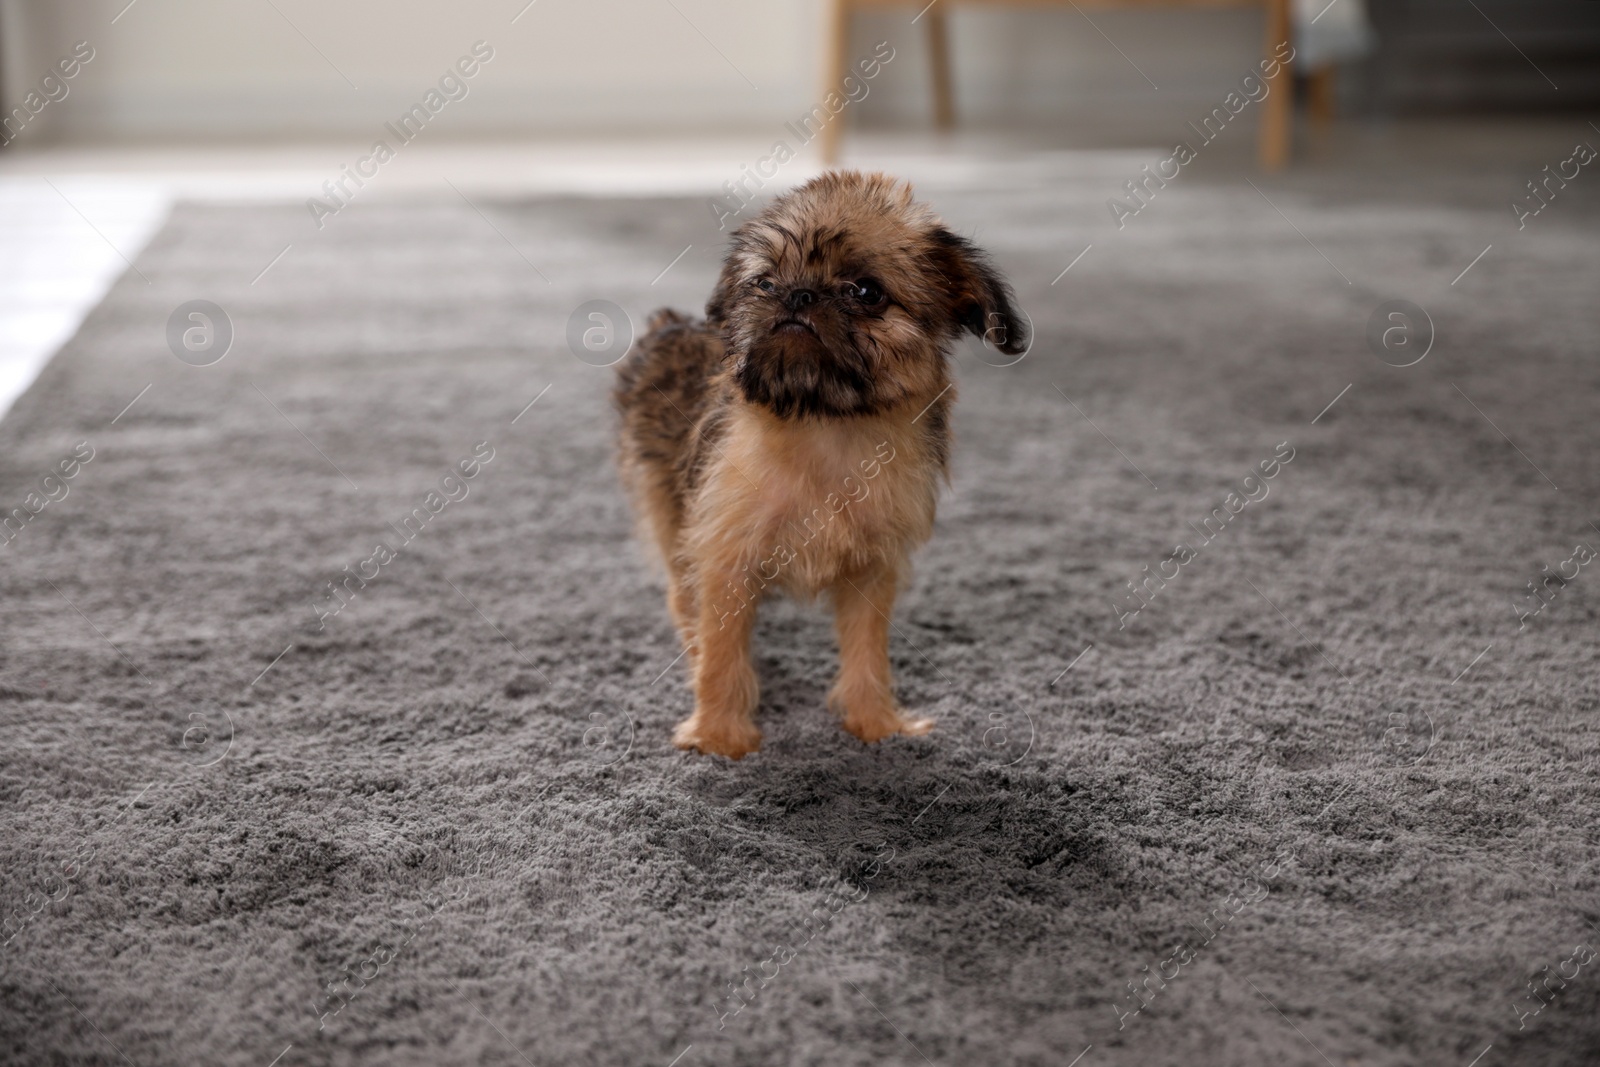 Photo of Adorable Brussels Griffon puppy near puddle on carpet indoors